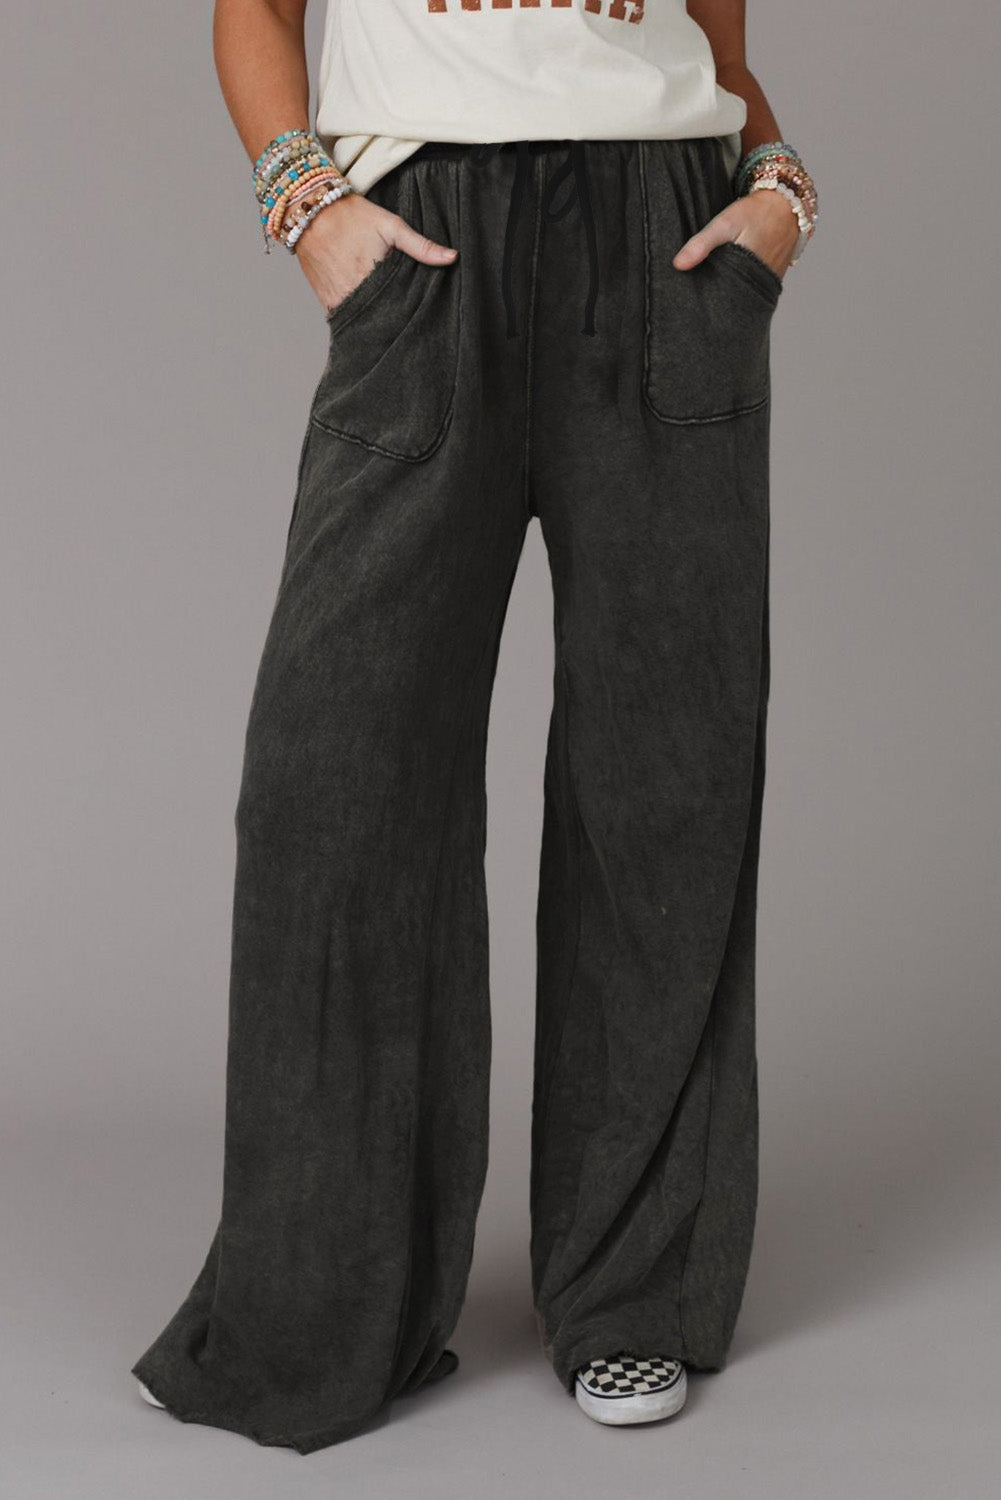 Wide Leg Pocketed Pants - Pants - Wild Willows Boutique - Massapequa, NY, affordable and fashionable clothing for women of all ages. Bottoms, tops, dresses, intimates, outerwear, sweater, shoes, accessories, jewelry, active wear, and more // Wild Willow Boutique.